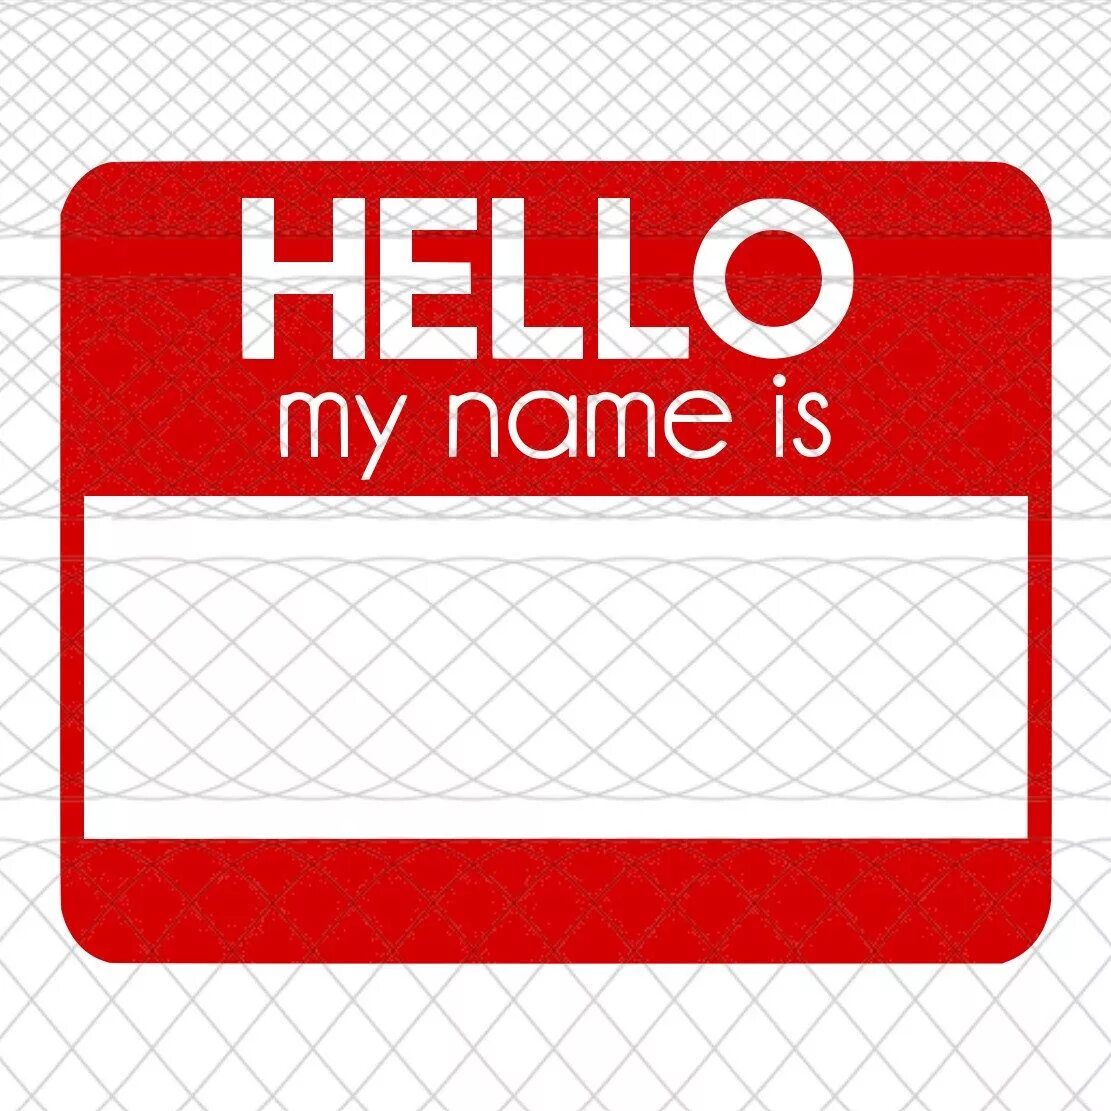 Hello my name is this is. Стикеры hello my name is. Стикеры hello my name. Наклейка my name is. Наклейка Хелло май нейм.